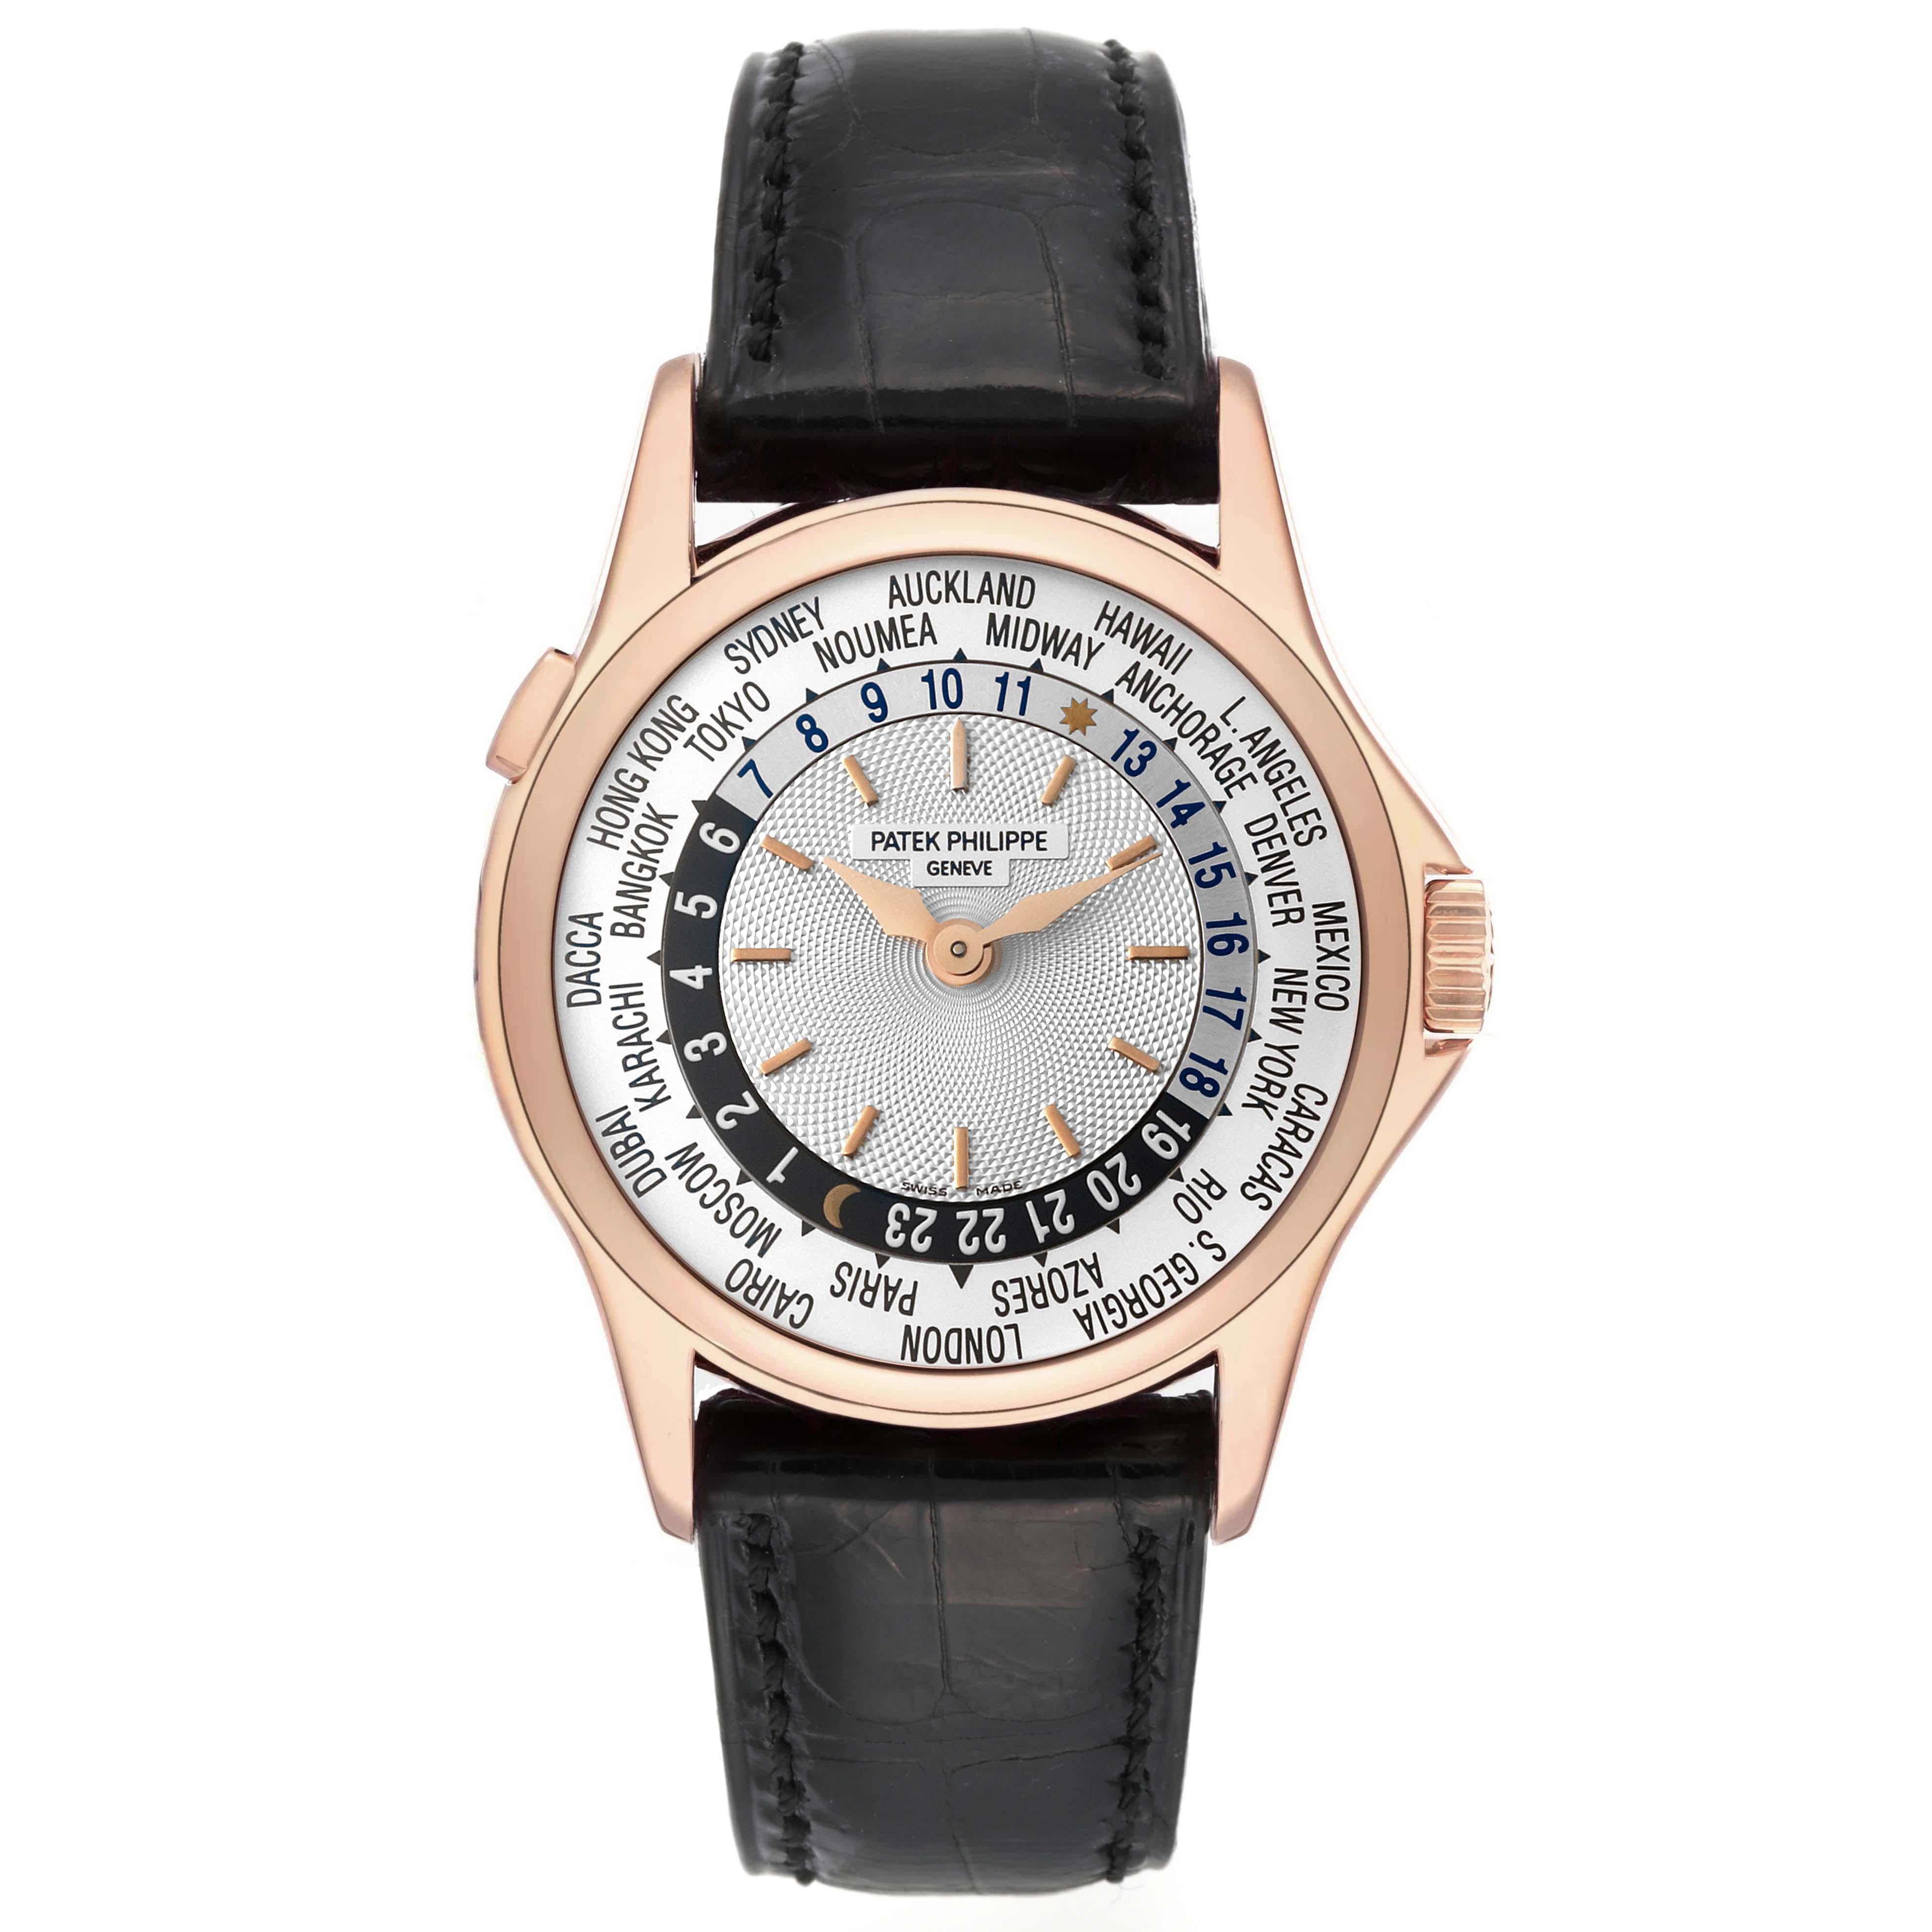 Patek Philippe World Time Automatic Silver Dial Rose Gold Mens Watch 5110 1